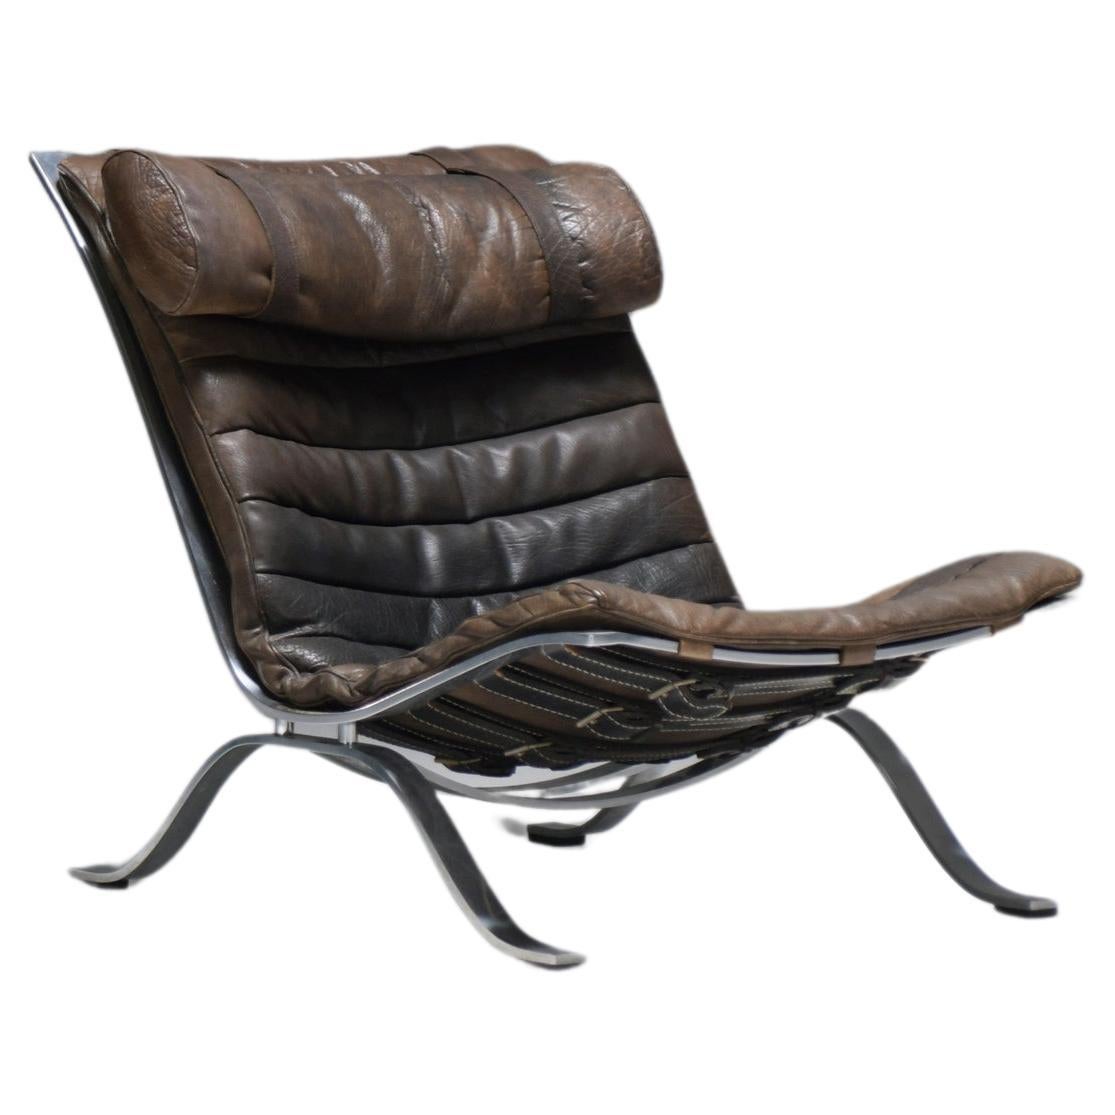 Stunning patinated ARI lounge chair in brown leather by Arne Norell - Möbel AB For Sale